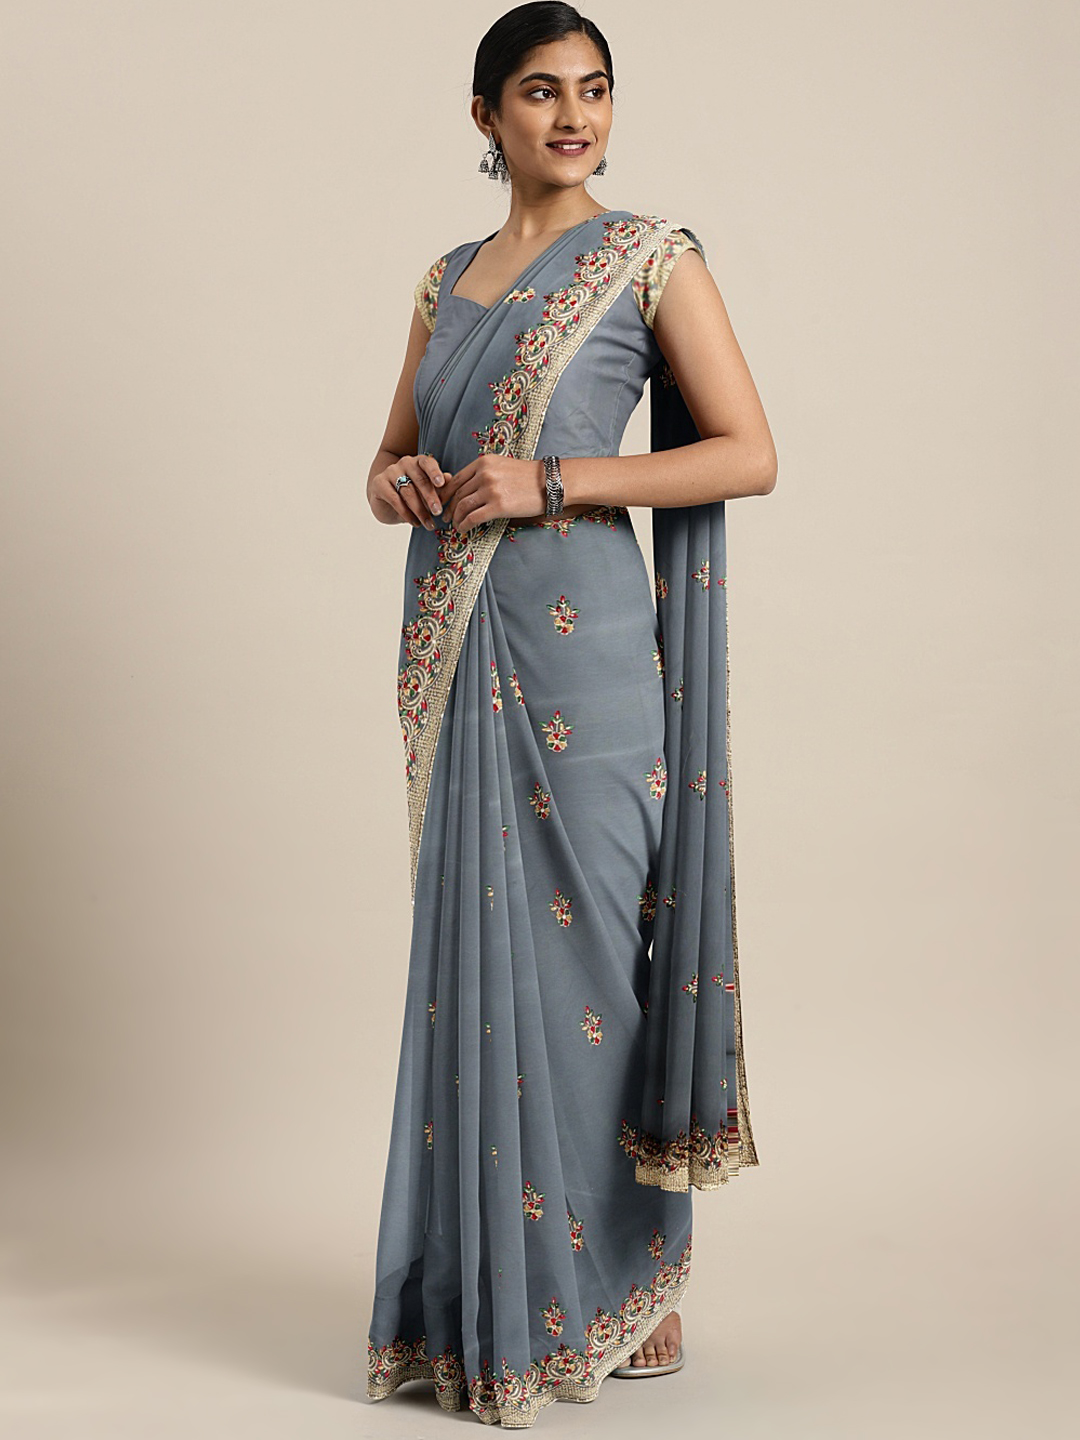 Soch Grey Embroidered Poly Georgette Saree Price in India